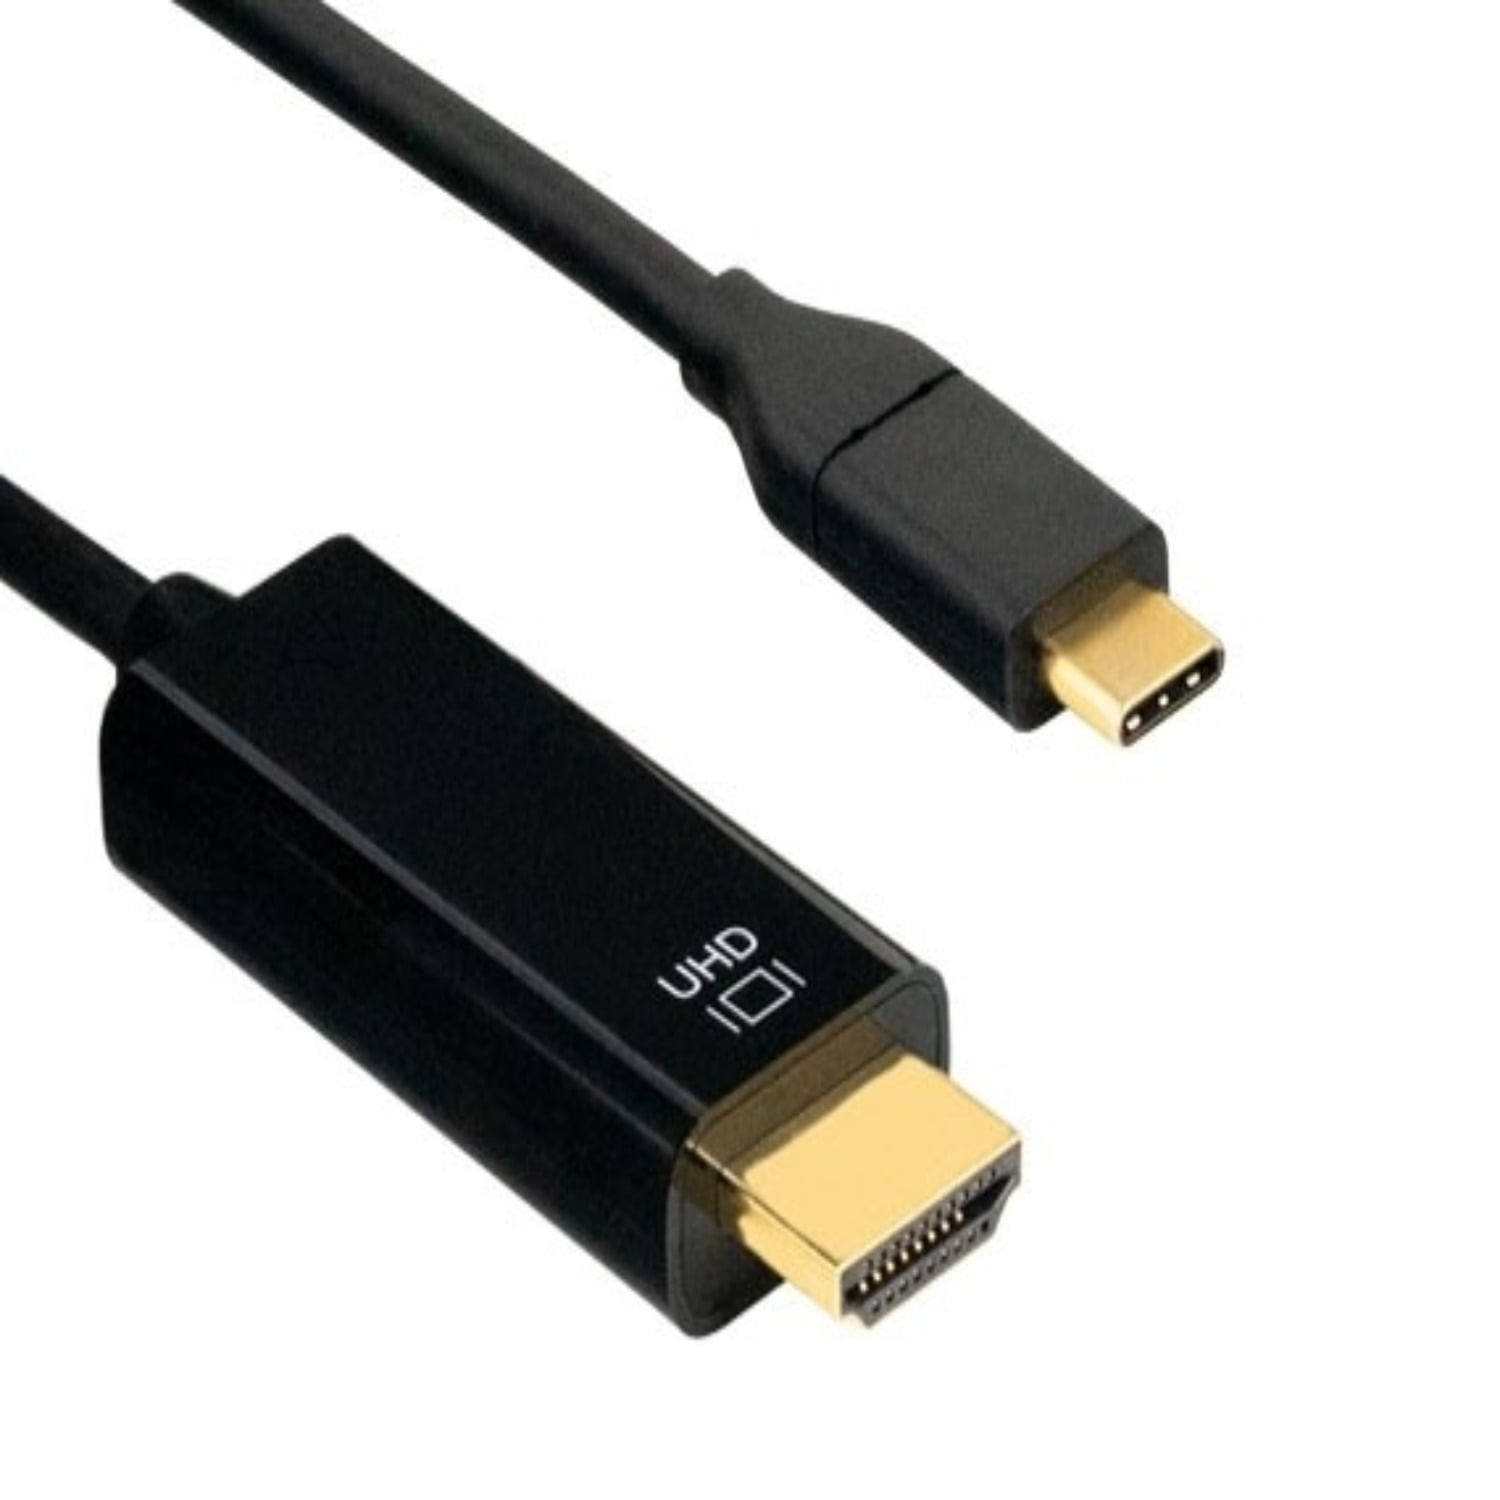 X-Lent USB C 3.1 GEN 2 Cable Type C to Type C Cable Thunderbolt 3 Compatible with 10Gbps and 100W Power Delivery and 4K@60Hz Video in Black 3.3ft 